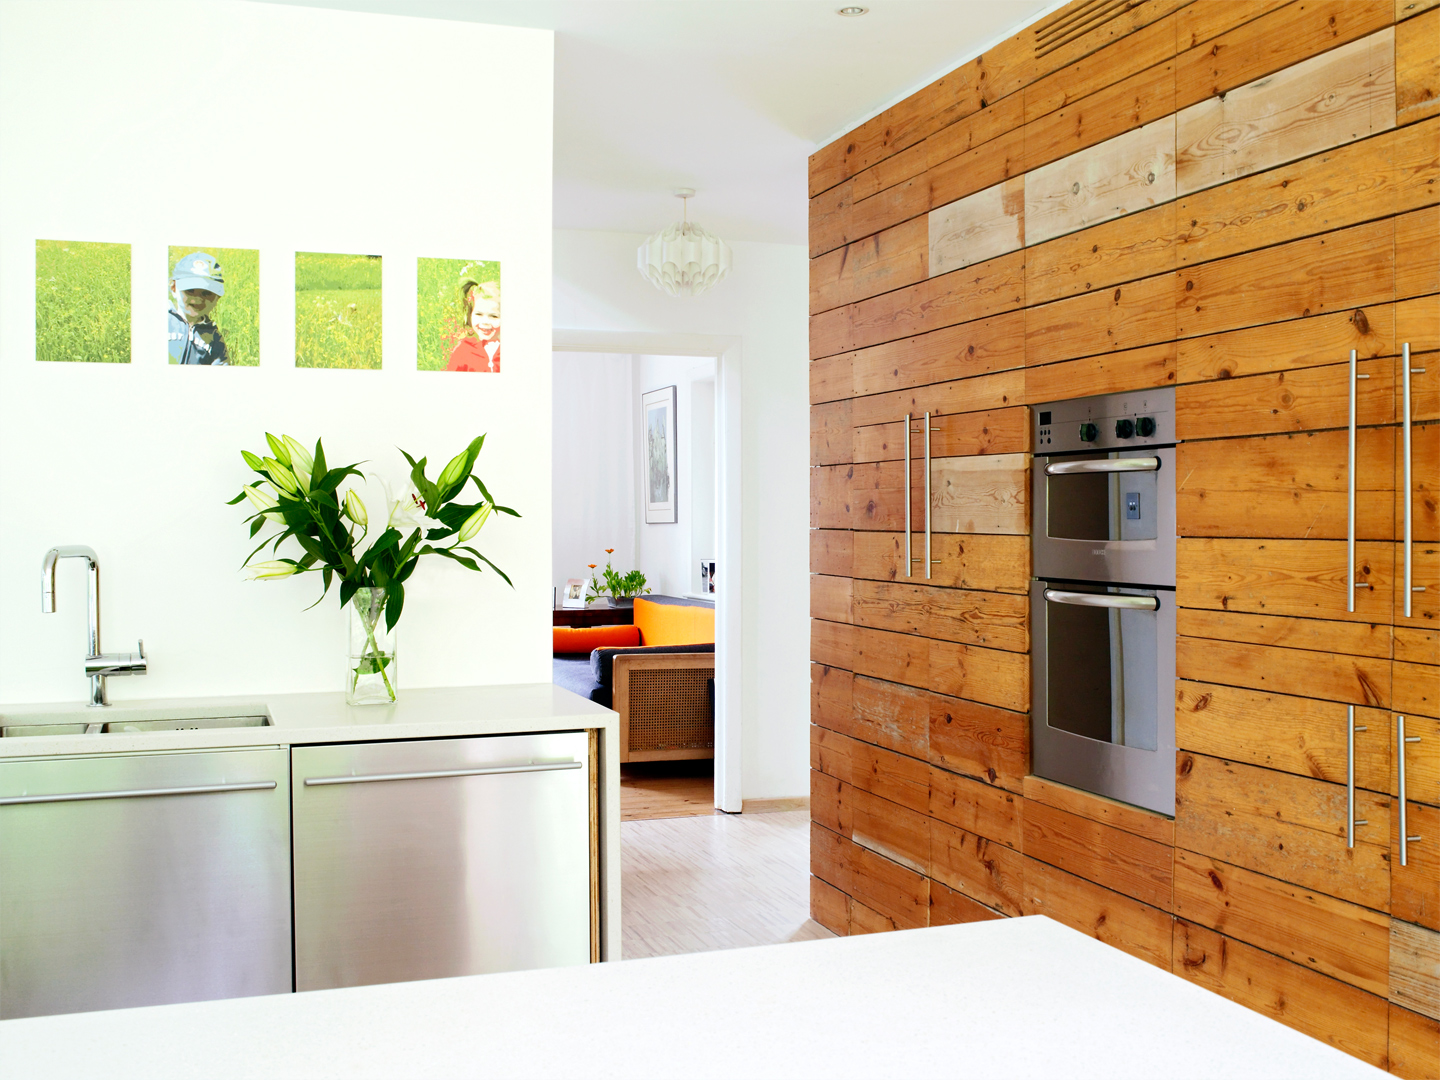 The white kitchen countertops are contrasted with wood panelled units.